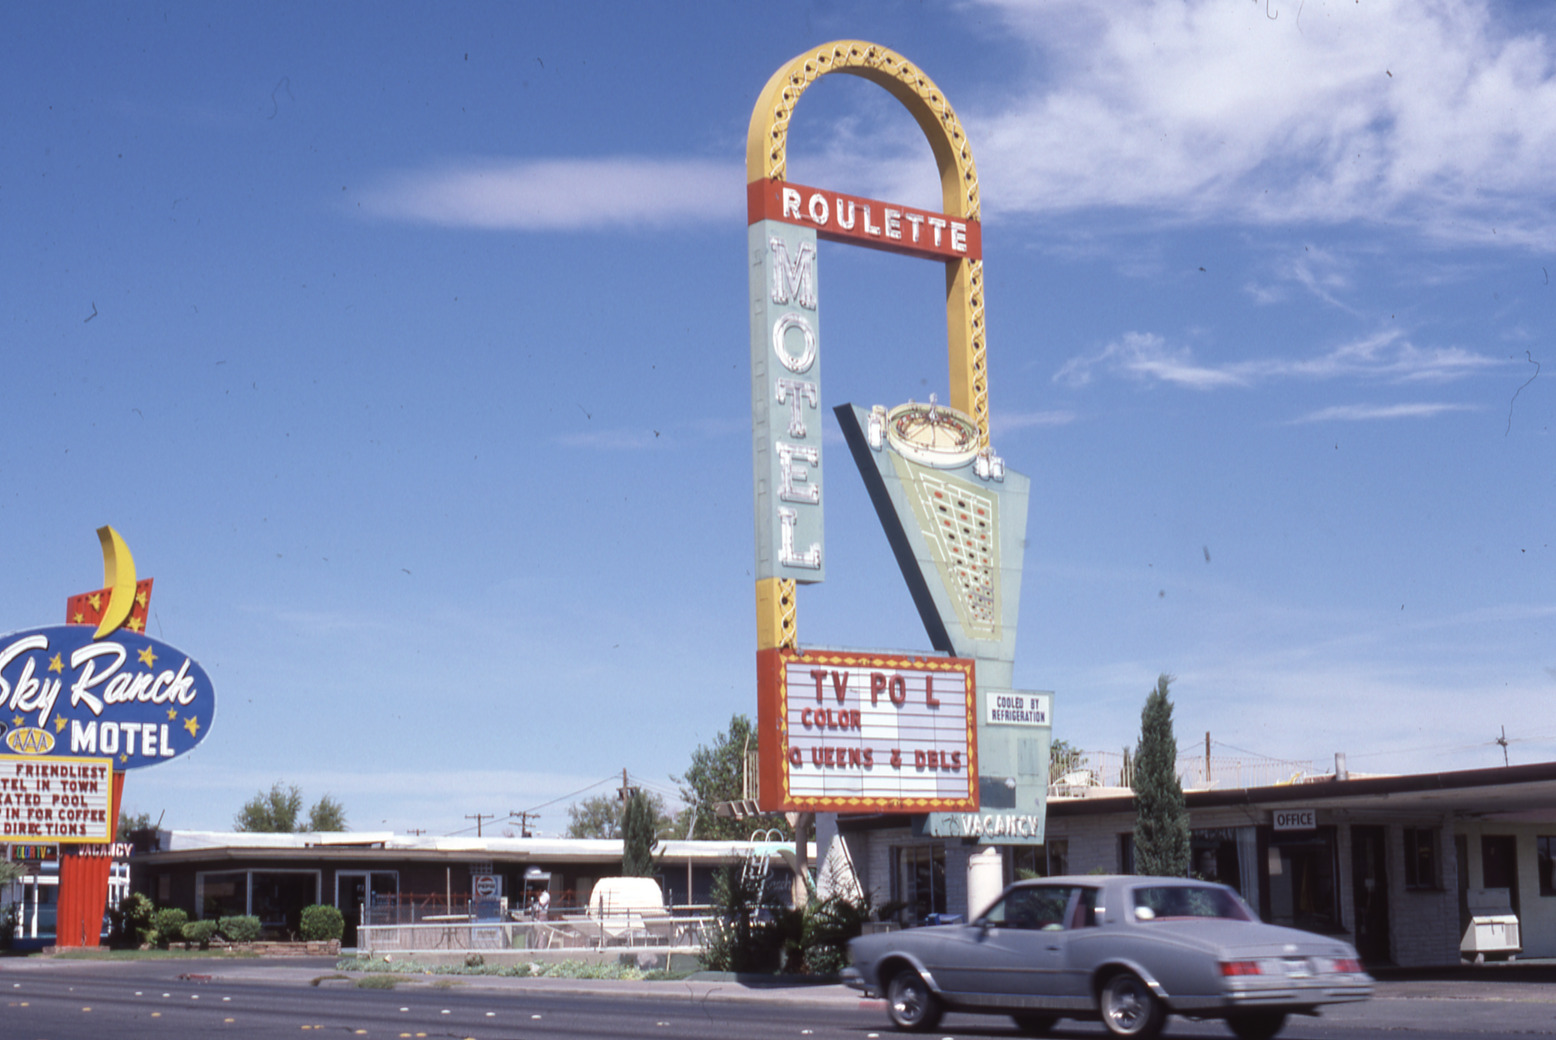  Roulette Motel flag mounted pylon and marquee signs, Las Vegas, Nevada: photographic print